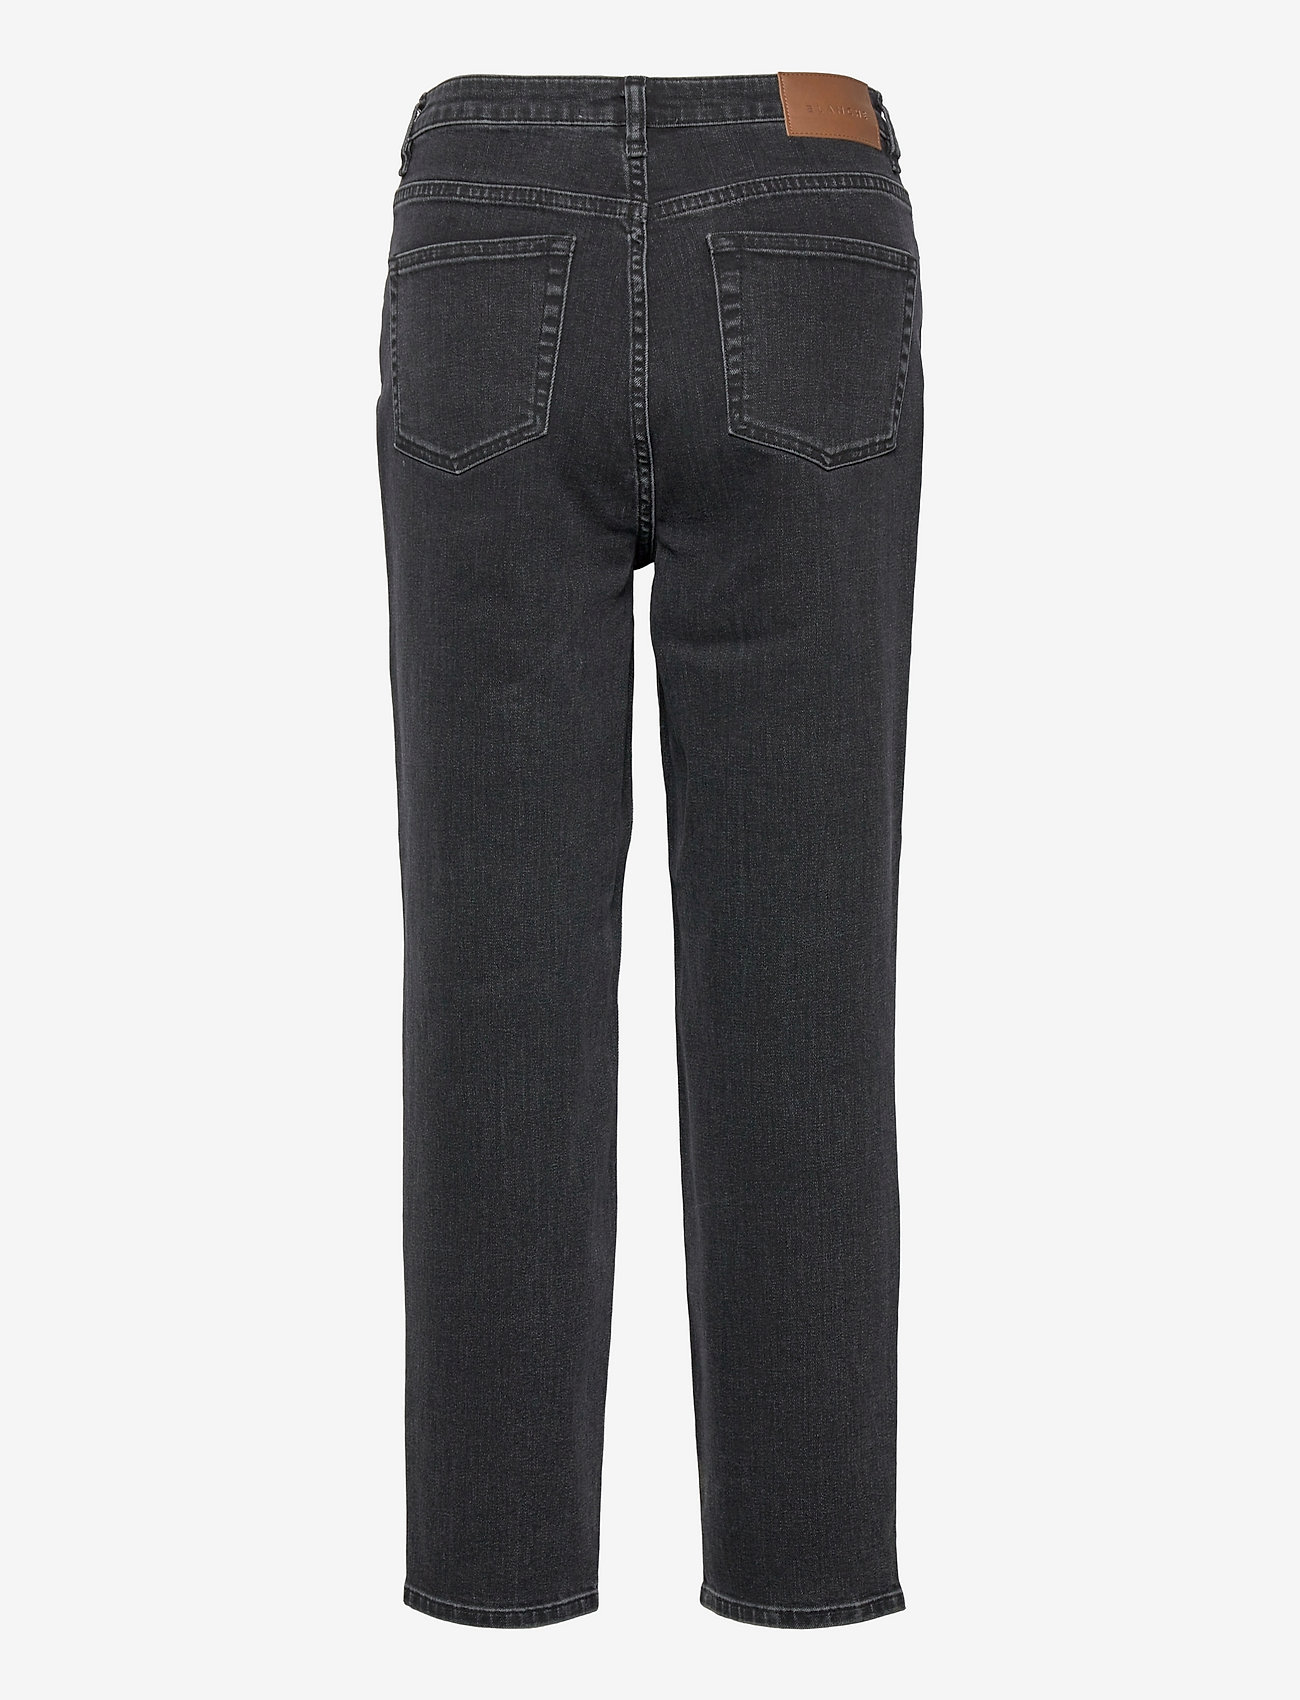 Blanche - Avelon - tapered jeans - grey stone wash - 1